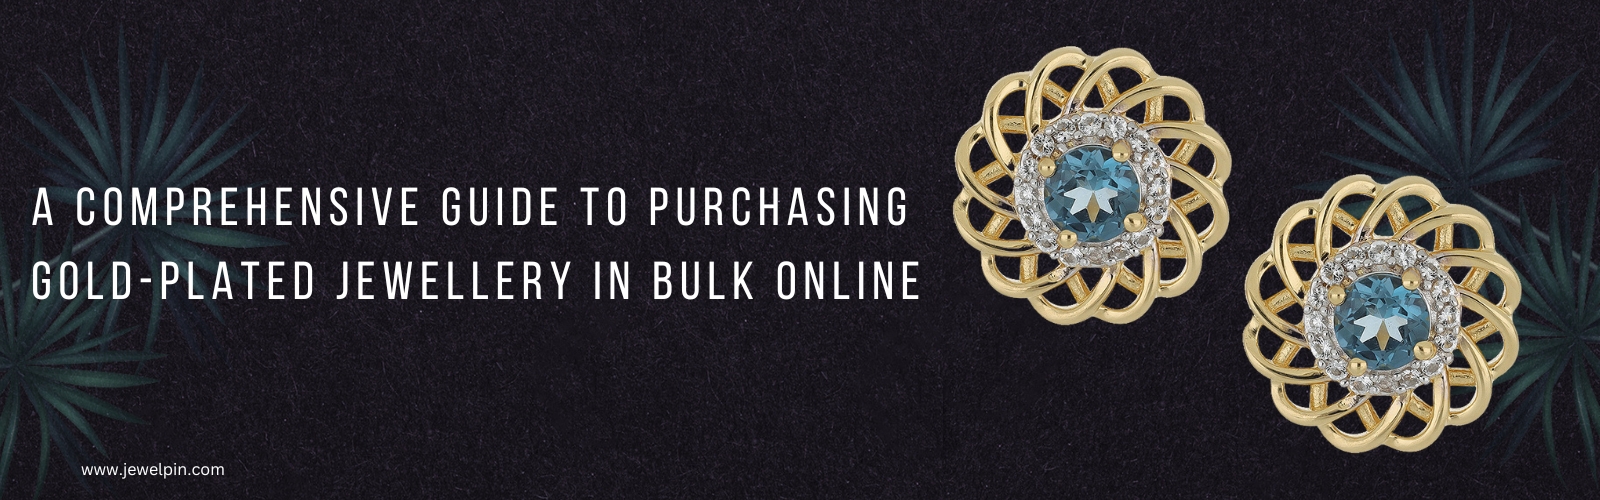 a comprehensive guide to purchasing gold plated jewellery in bulk online